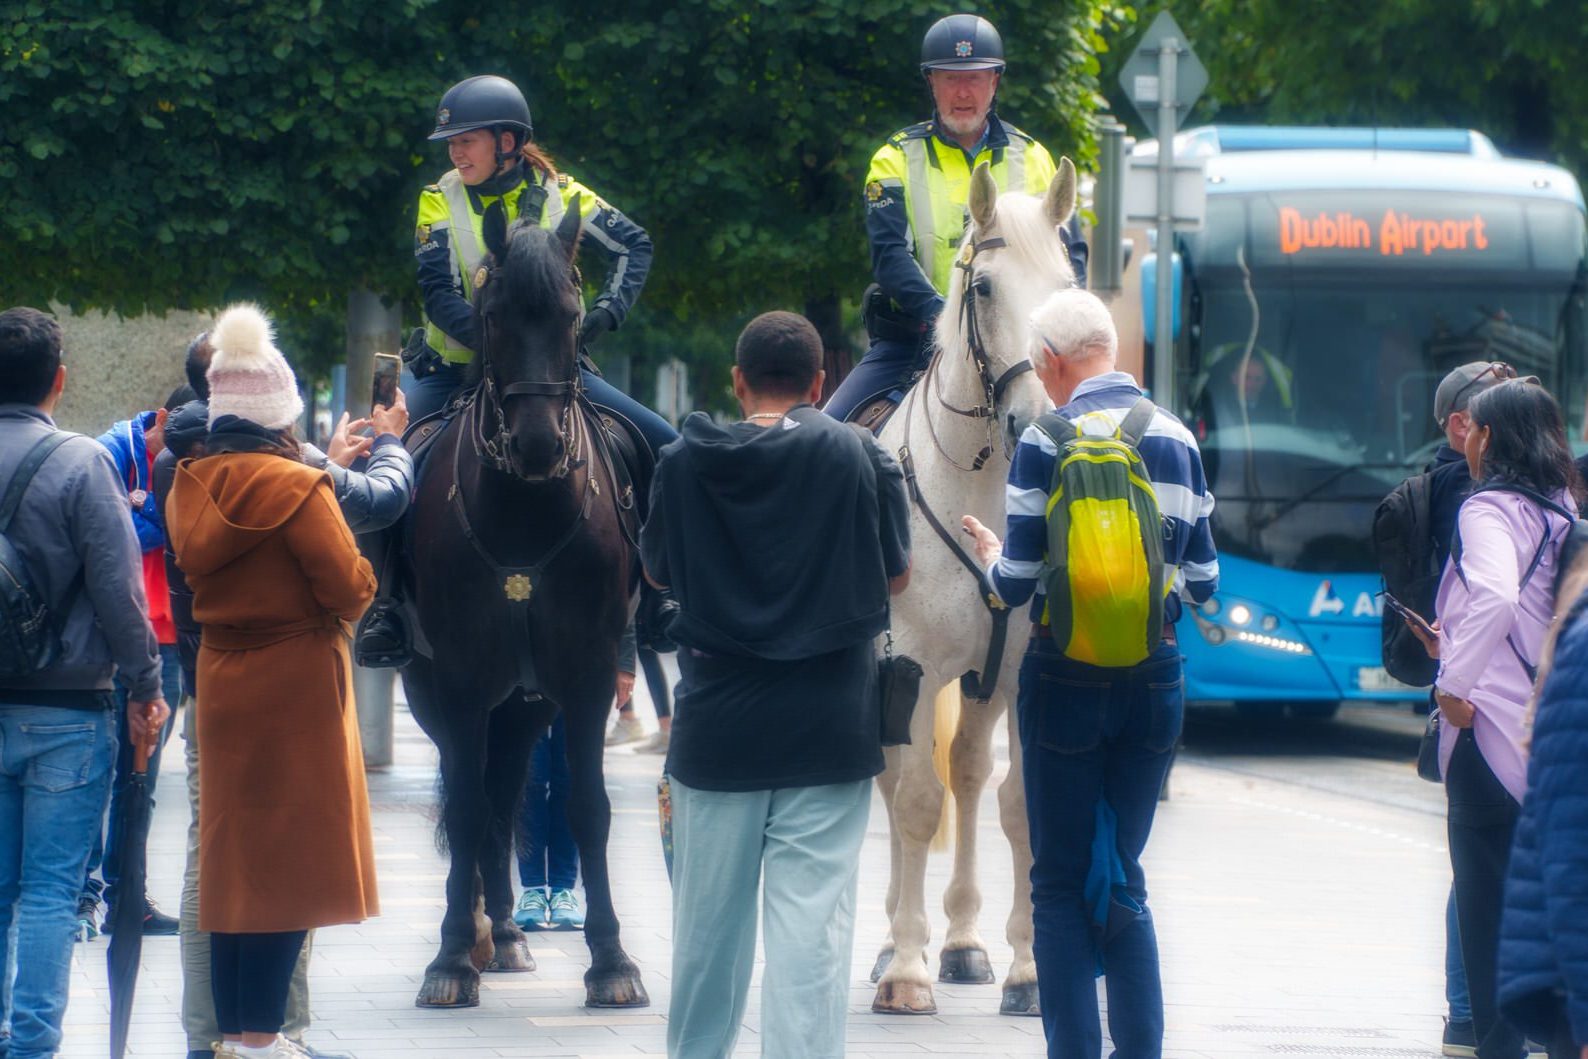 THE MINISTER RESPONSIBLE PROMISED ADDITIONAL POLICING [THEY HAVE ARRIVED WITH THEIR HORSES IN O'CONNELL STREET] 004